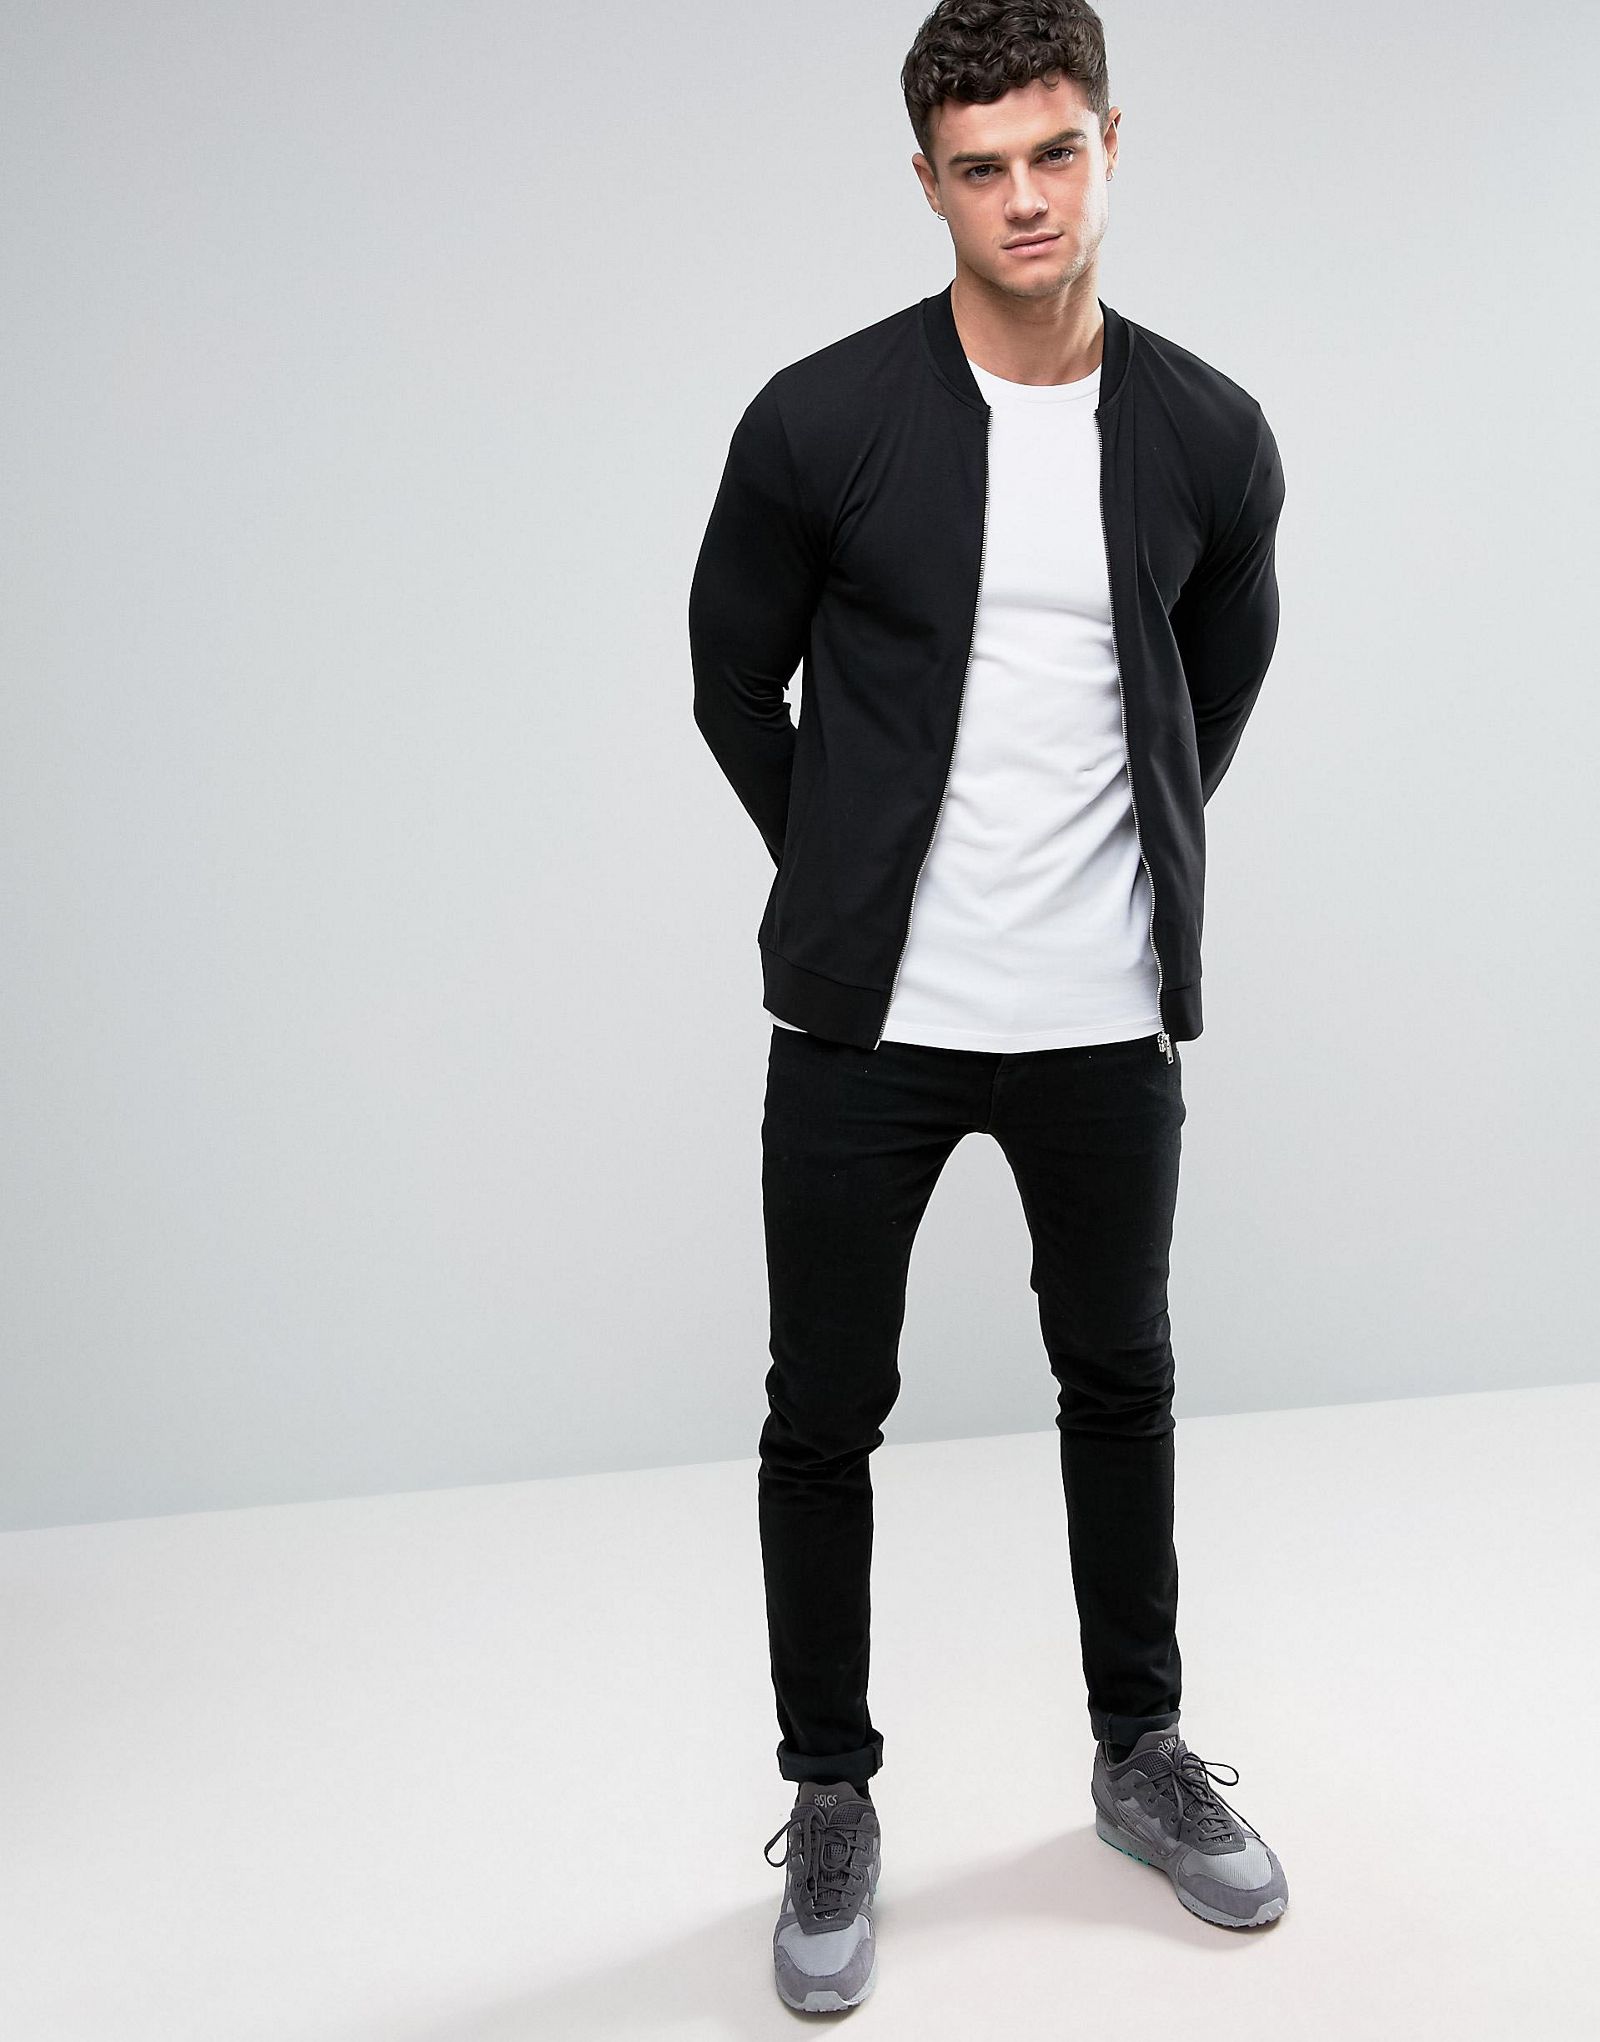 ASOS Muscle Jersey Bomber Jacket/Muscle T-Shirt 2 Pack Black/White SAVE